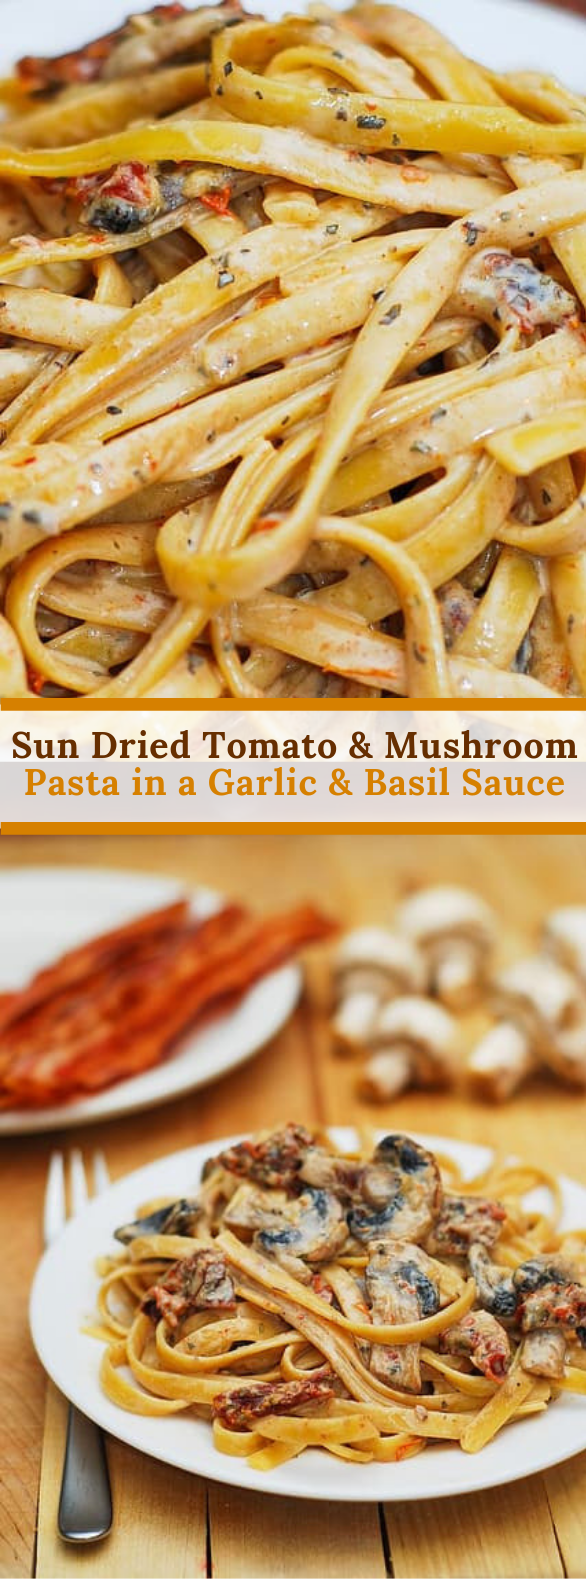 SUN DRIED TOMATO AND MUSHROOM PASTA IN A GARLIC AND BASIL SAUCE #dinner #grilled